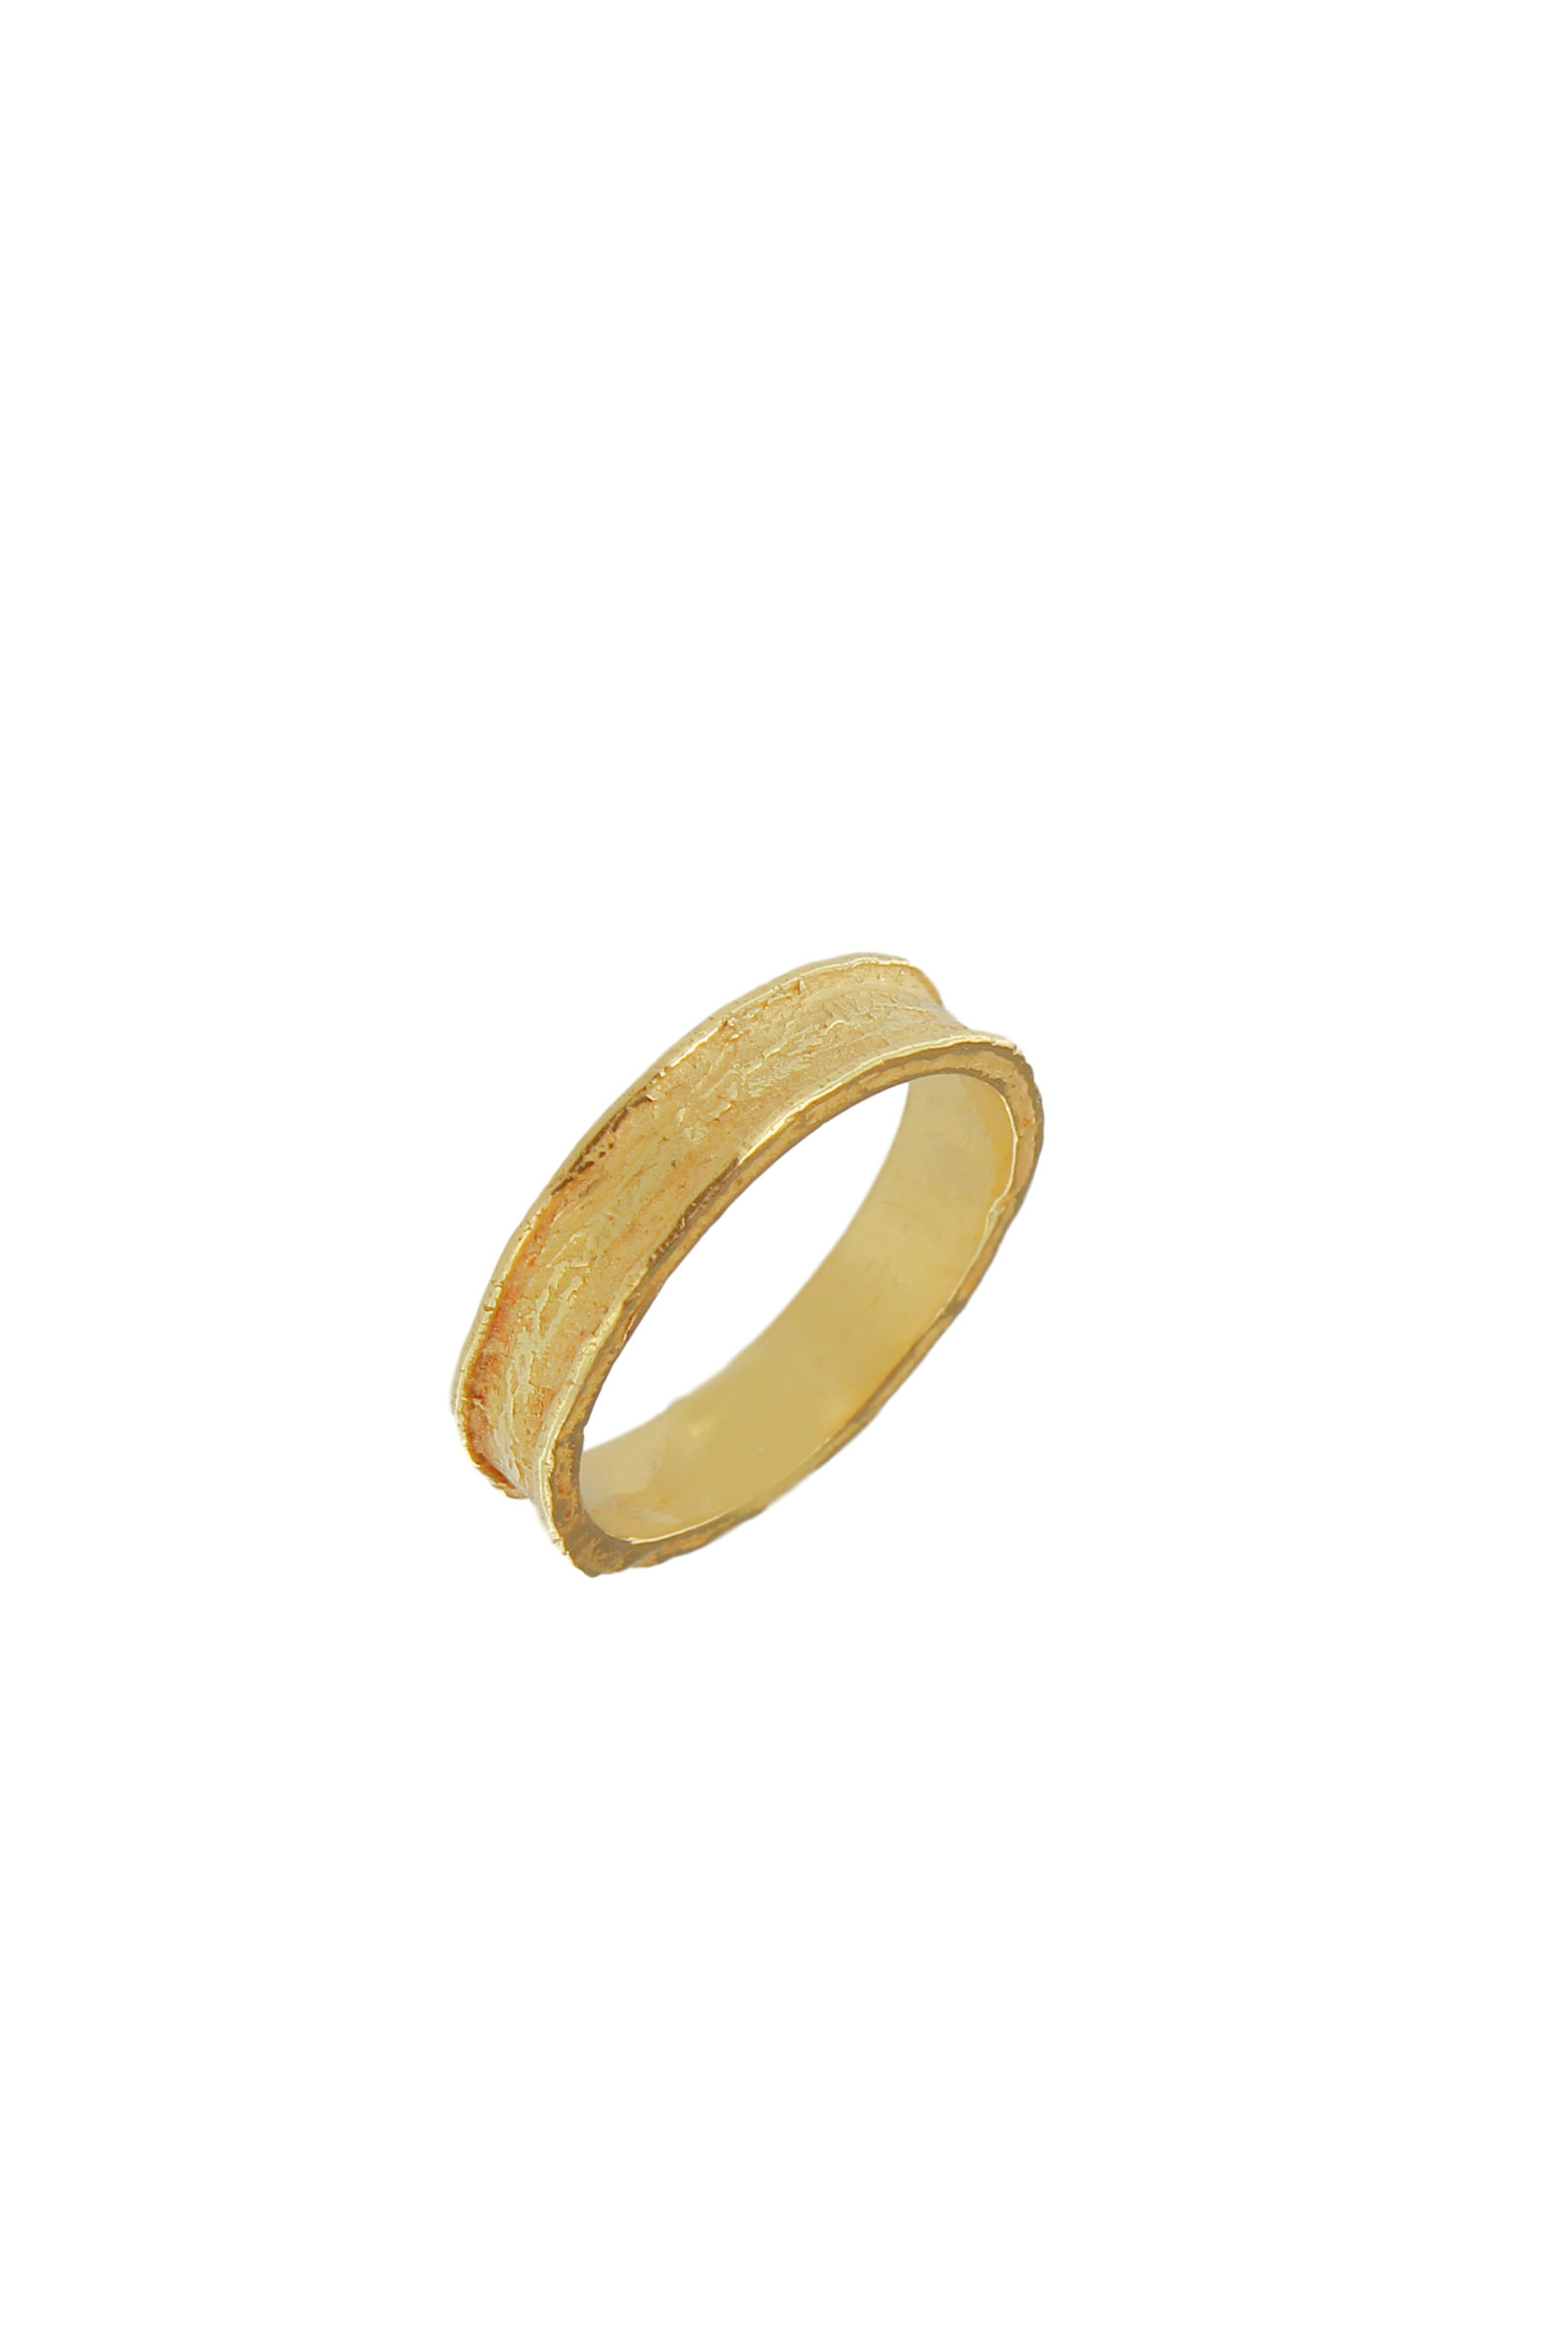 SE148C-18-Kt-Yellow-Gold-Band-Ring-1